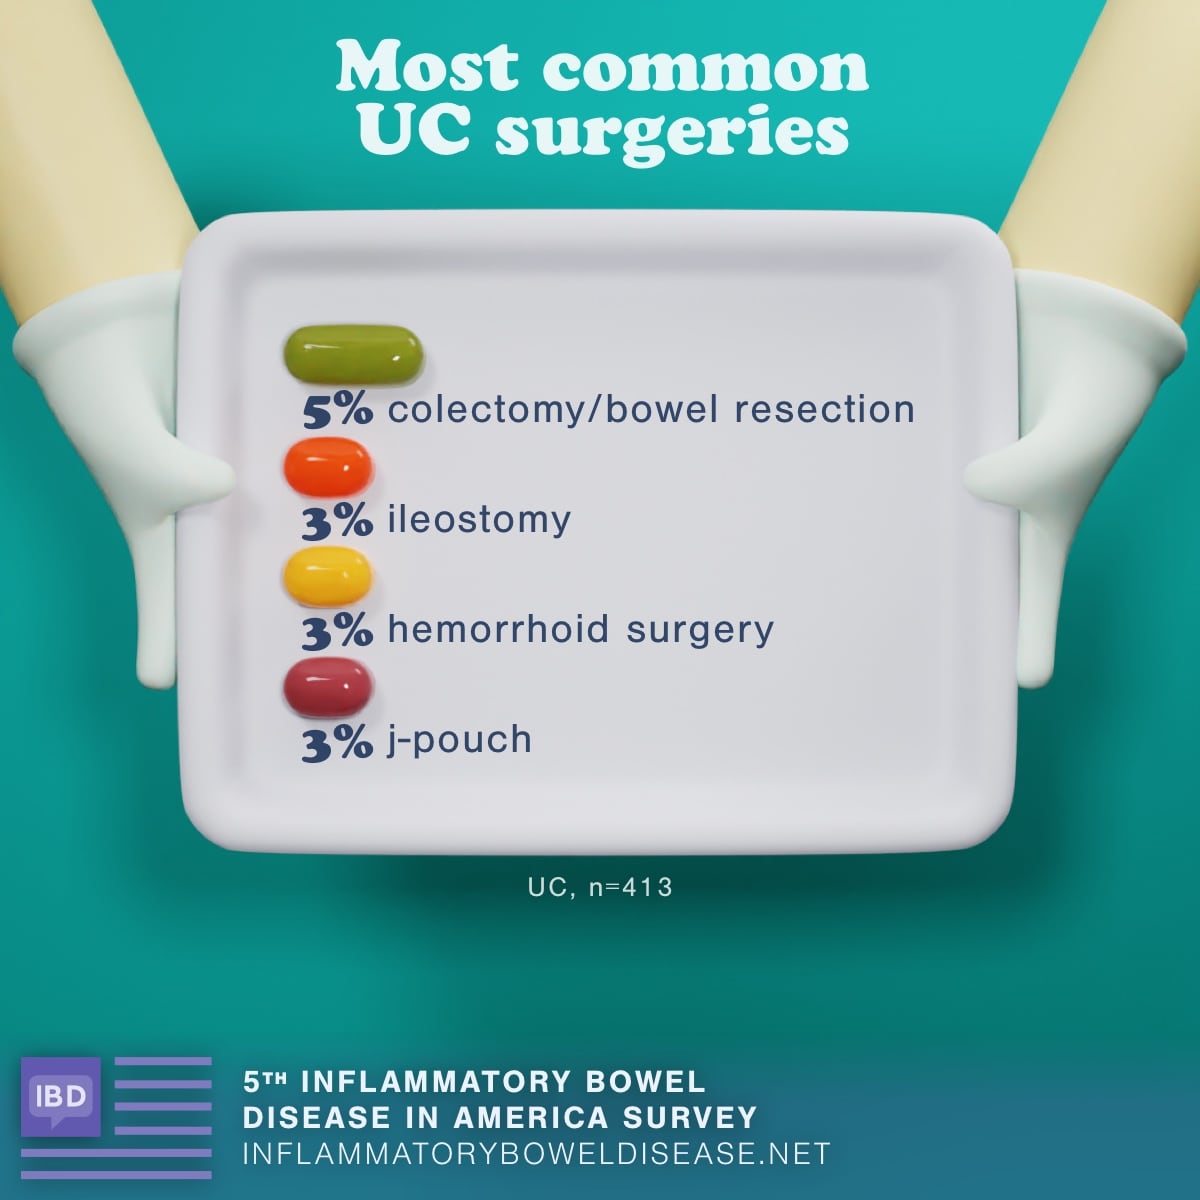 Most common ulcerative colitis surgeries. 5% had a colectomy/bowel resection, 3% had an ileostomy, 3% had hemorrhoid surgery, and 3% had a j-pouch.